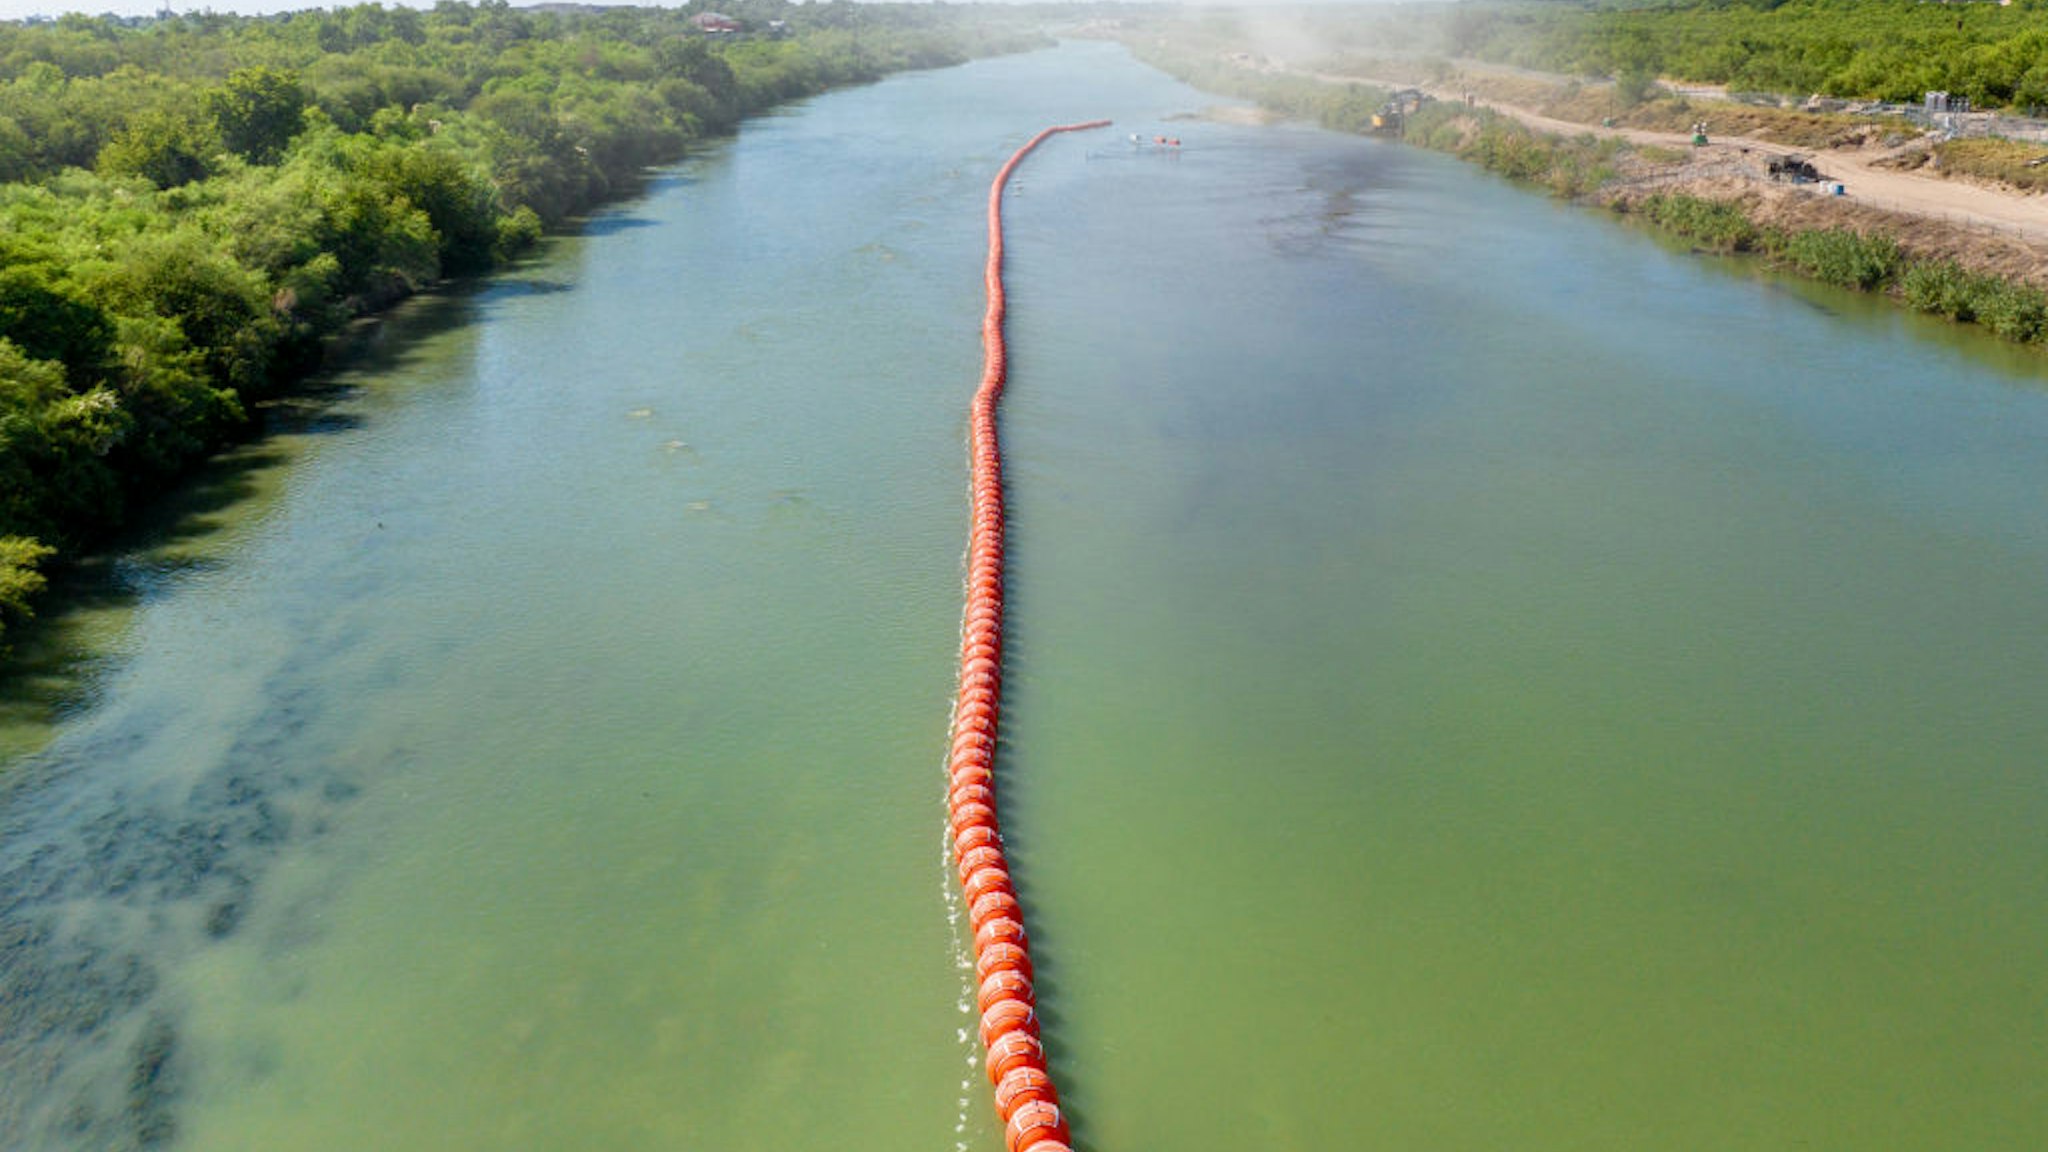 EAGLE PASS, TEXAS - JULY 18: Buoy barriers are installed and situated in the middle of the Rio Grande river on July 18, 2023 in Eagle Pass, Texas. Texas has begun installing buoy barriers along portions of the Rio Grande river in an effort to deter illegal border crossings.